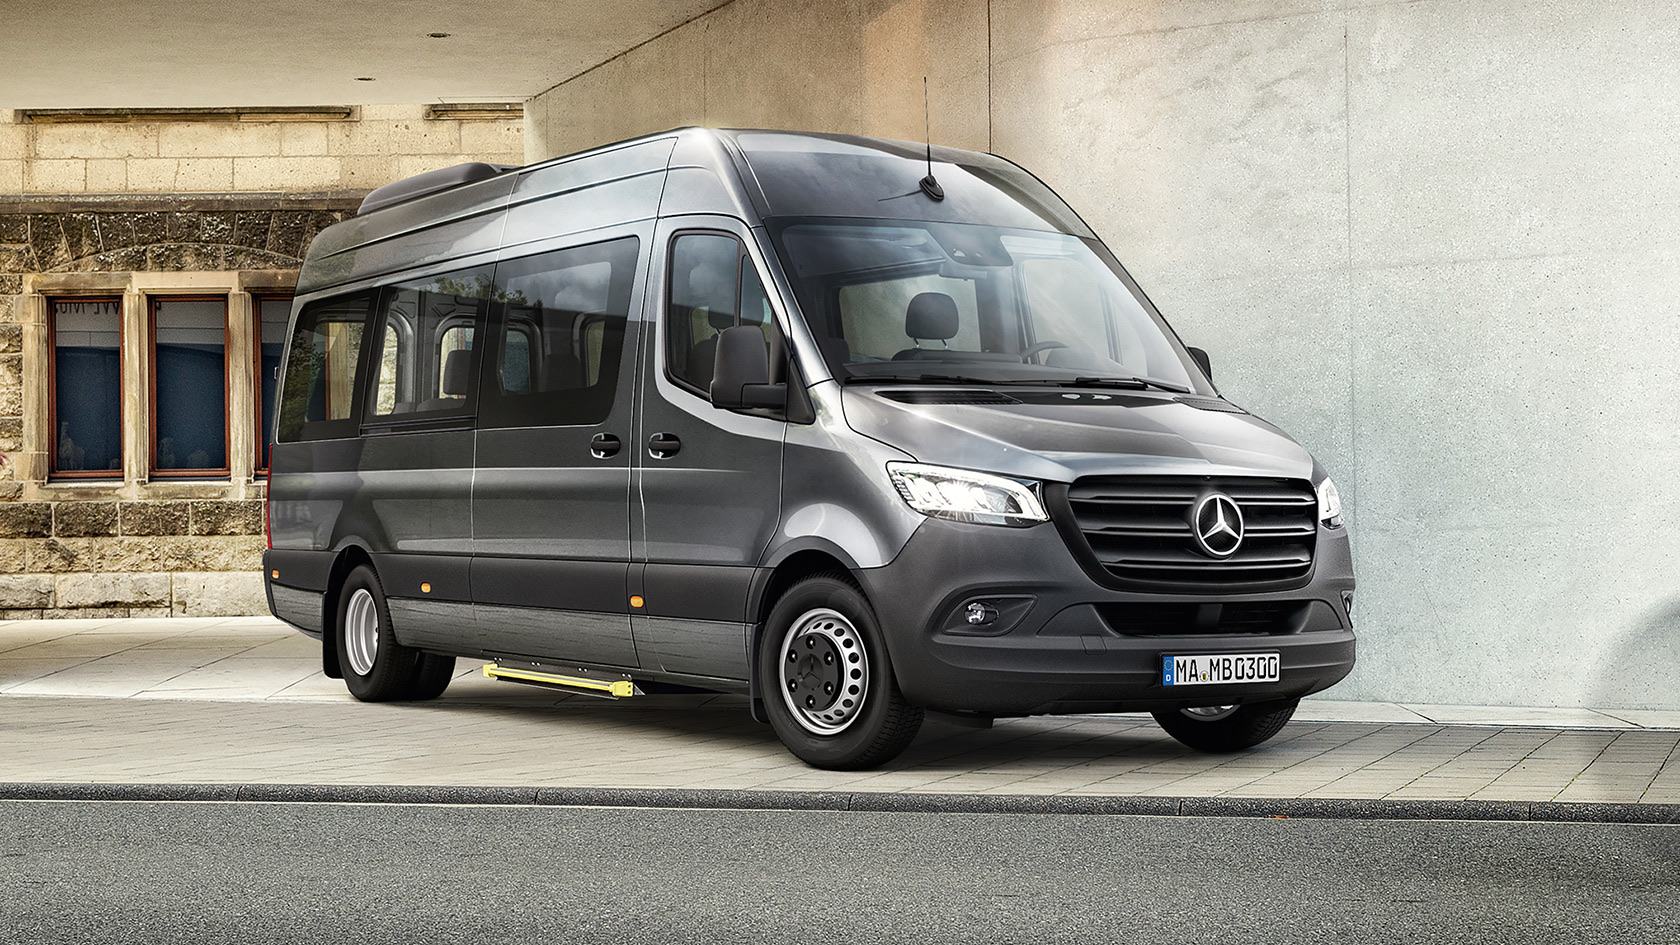 Choosing the Perfect Minibus Hire for Your Next Corporate Event